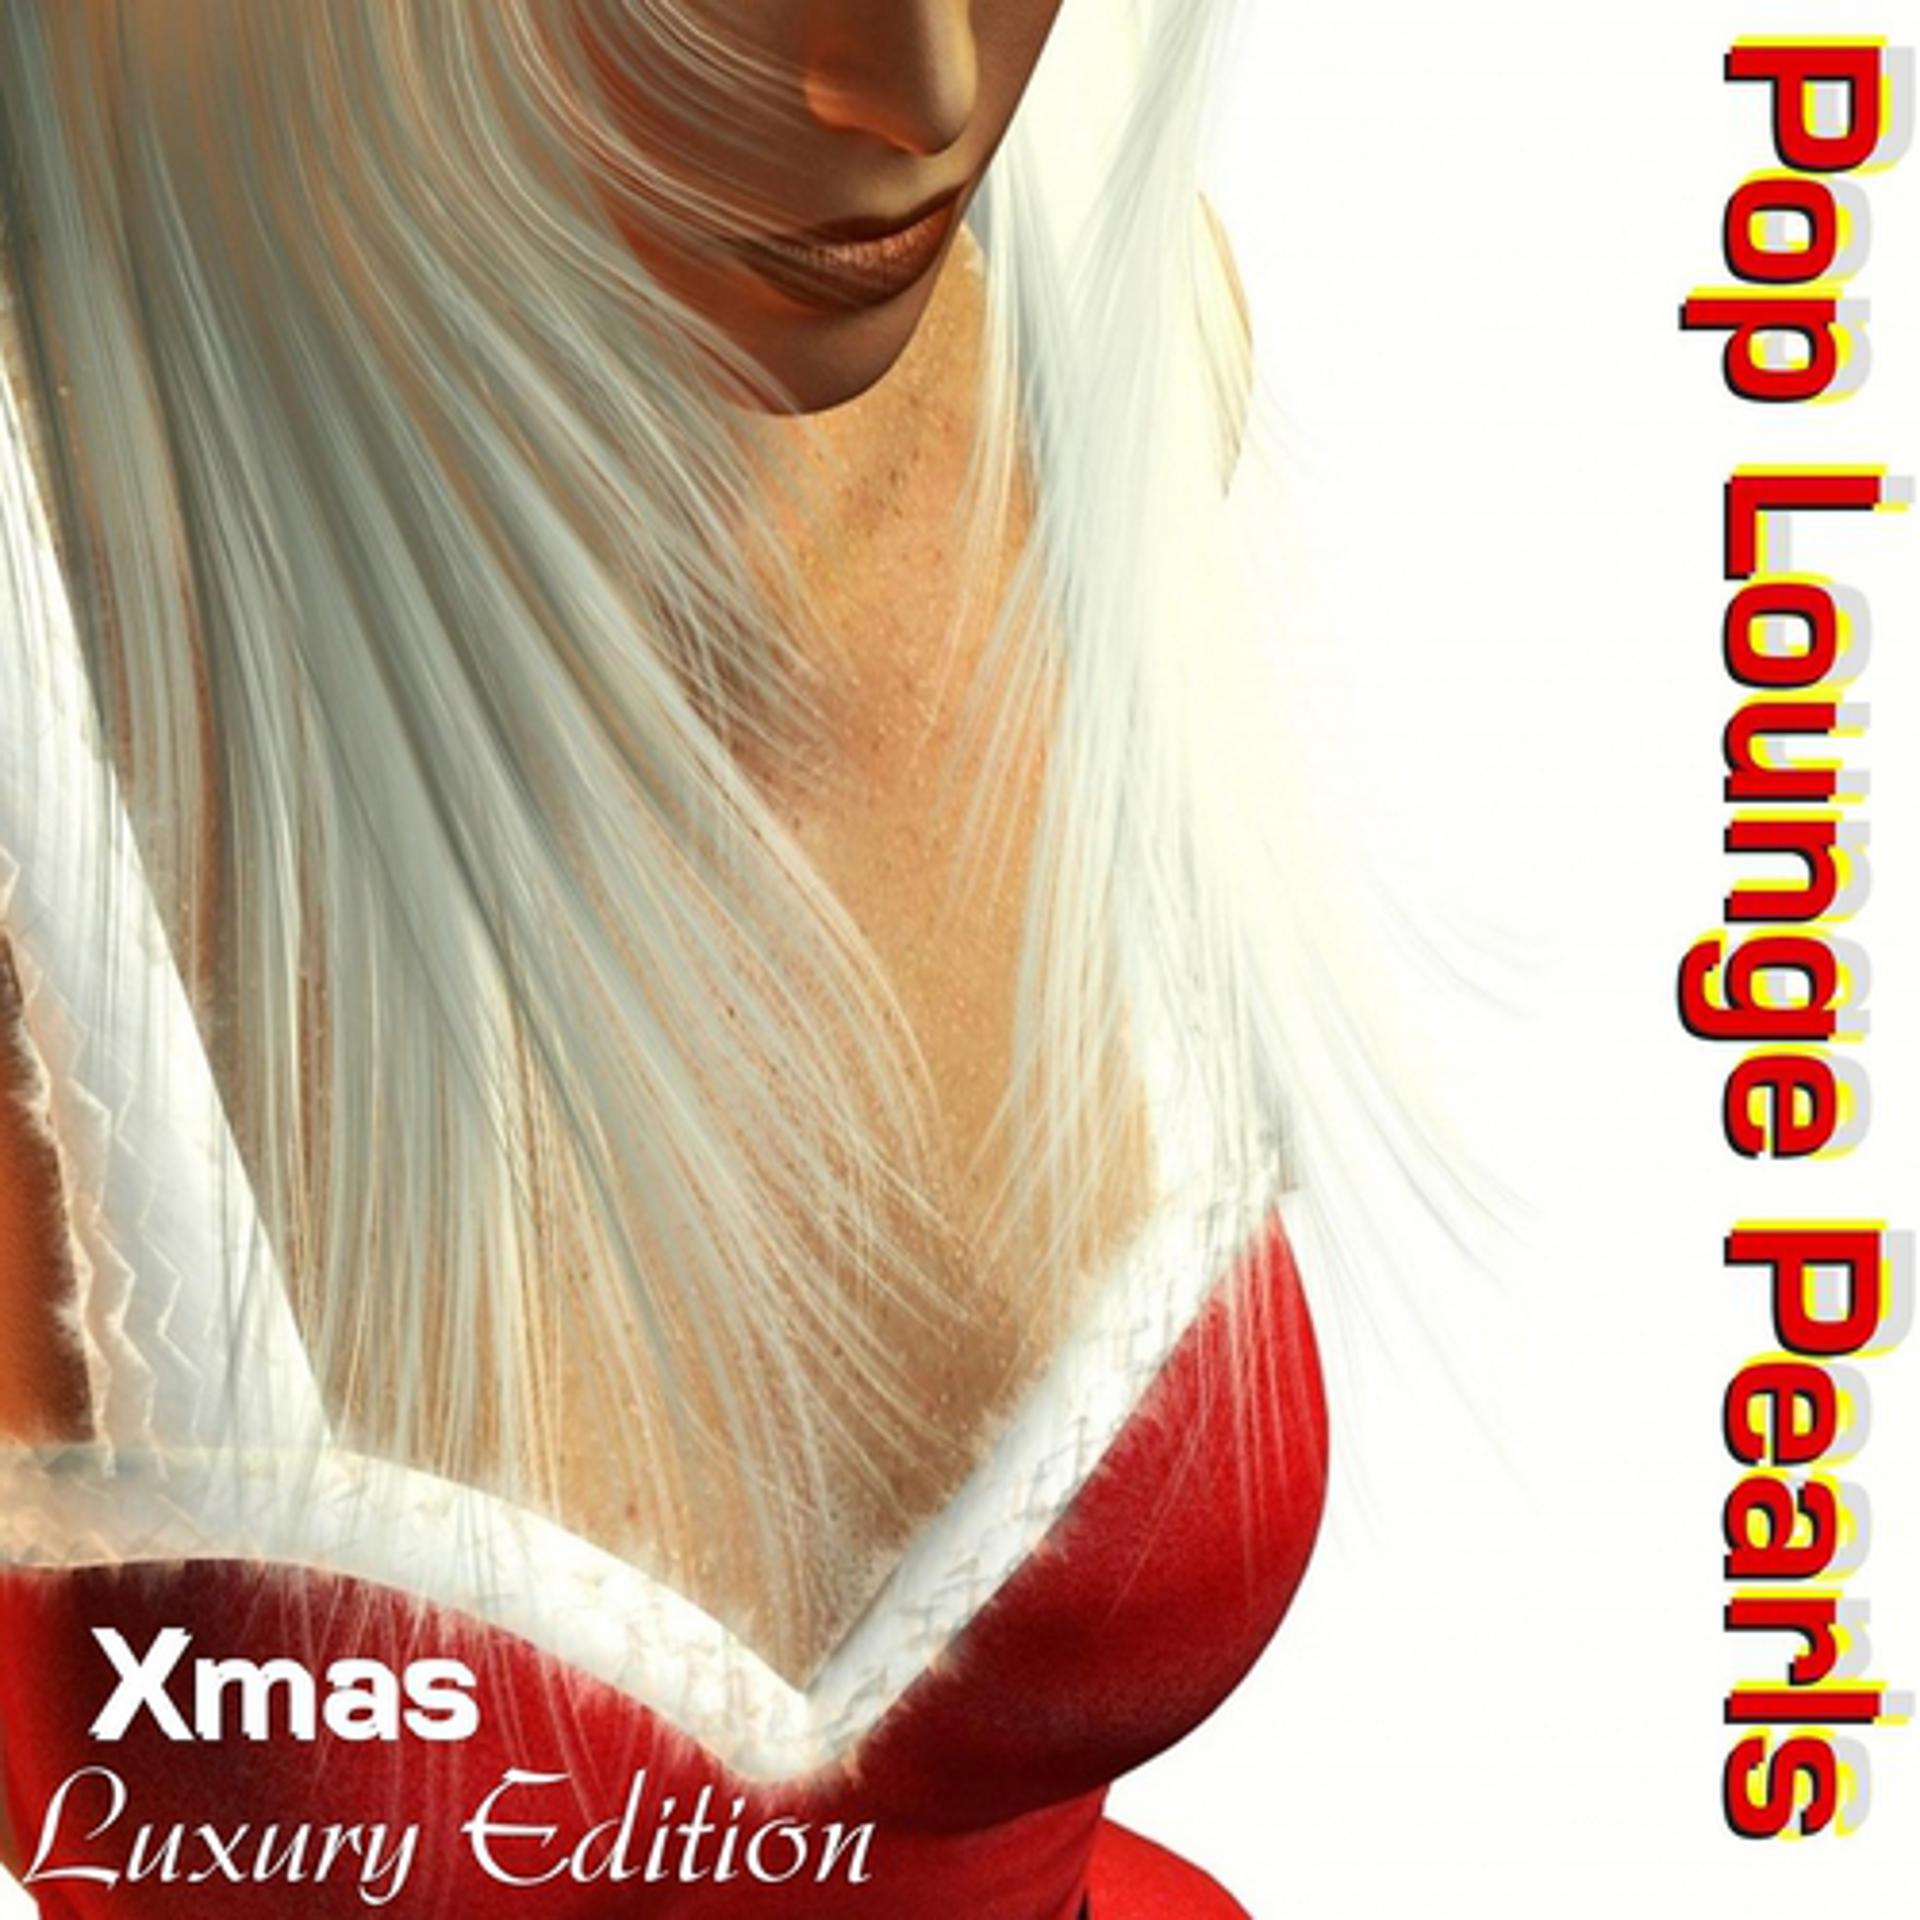 Постер альбома Pop Lounge Pearls (Chill del Mar Sunset Hotel Cafe Xmas Edition)